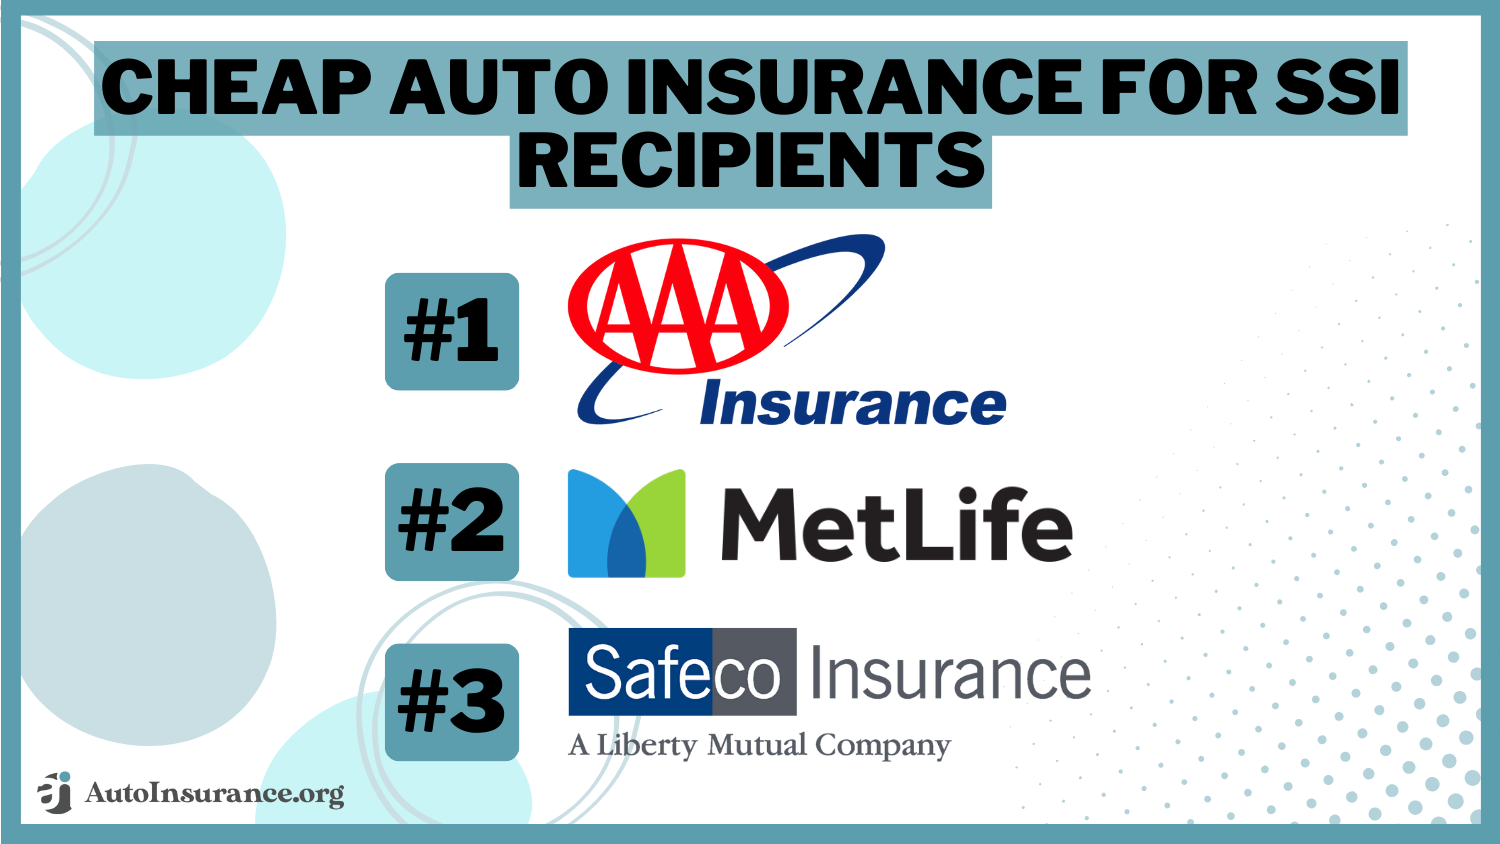 Cheap auto insurance for SSI Recipients: AAA, MetLife, Safeco Insurance